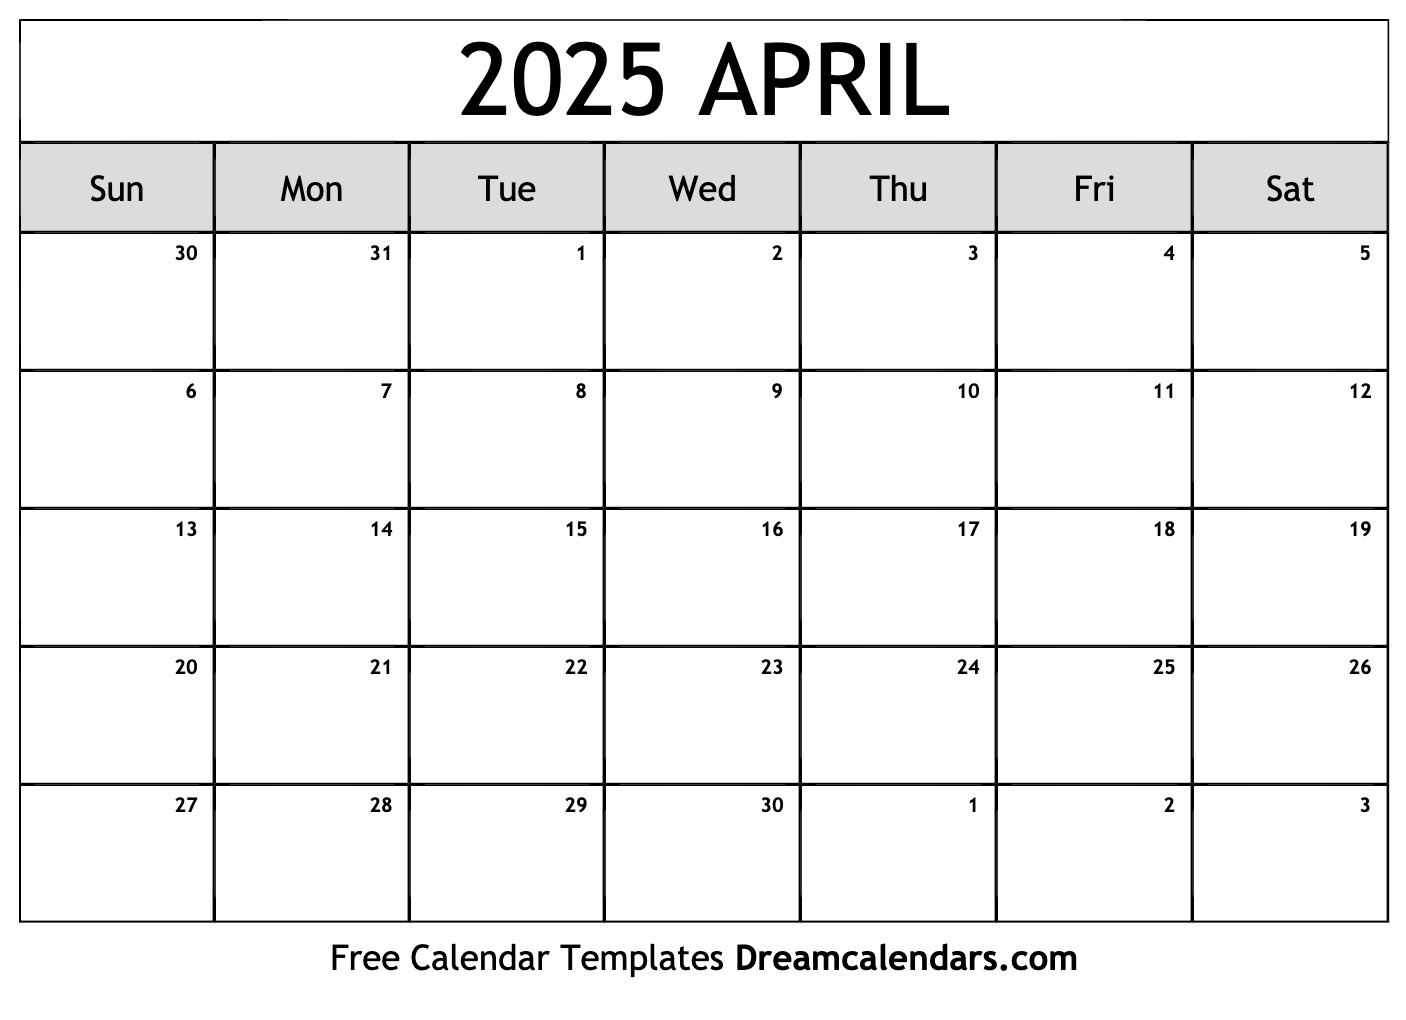 2025 Printable Calendar One Page Free Download